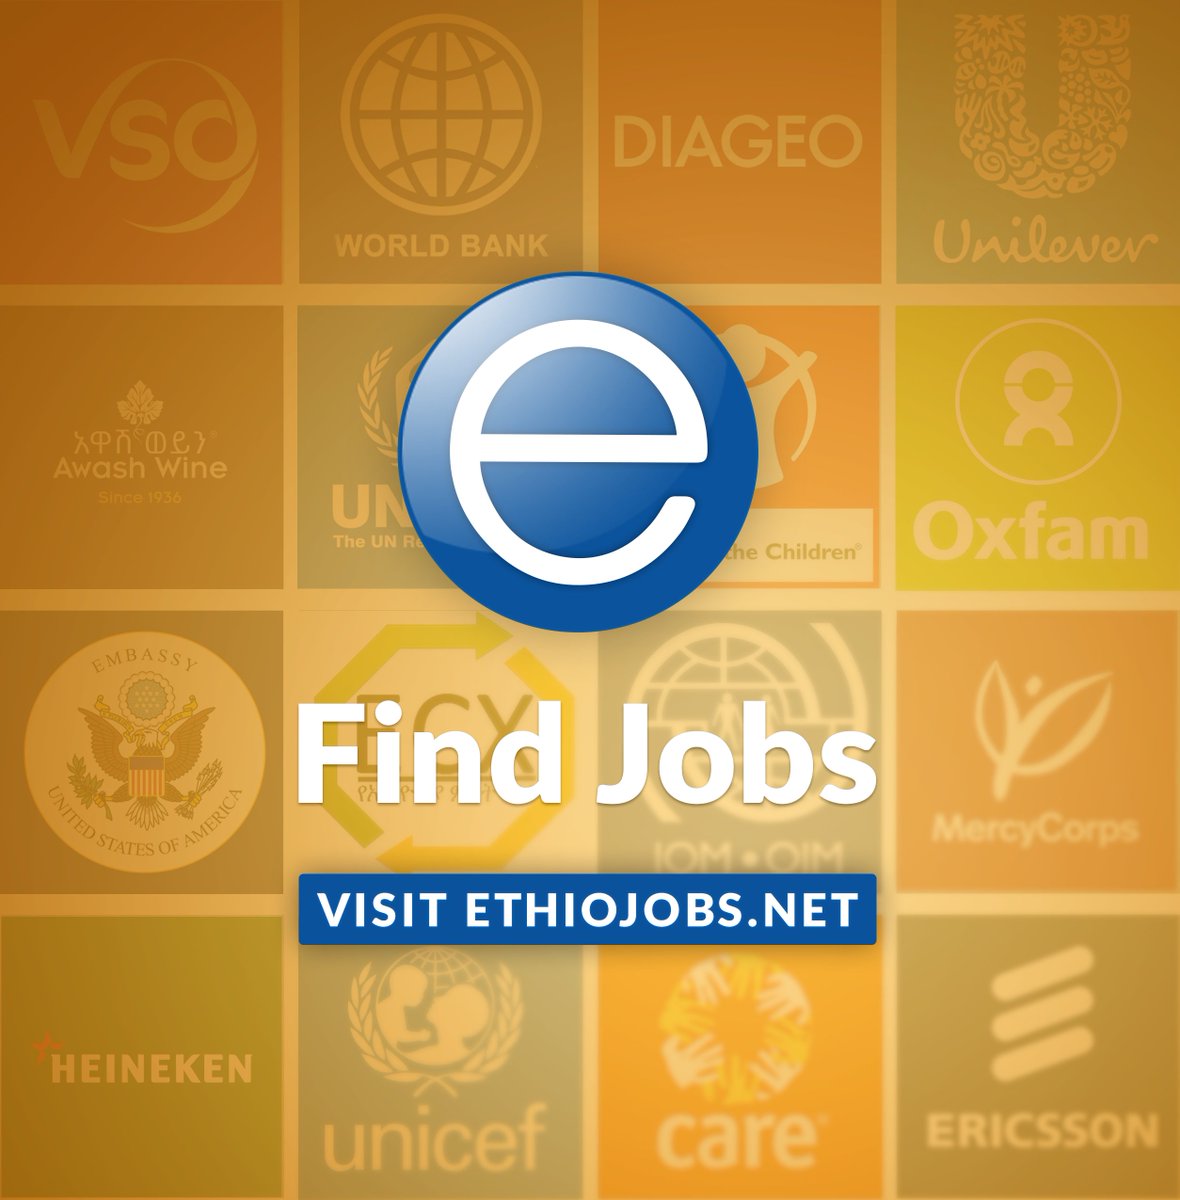 Ethiojobs has listed over 550 latest jobs in private, local, international, multinational, and public institutions! Find out companies hiring near you and APPLY! bit.ly/34uTXMc

#ethiojobs #jobs #publicinstitute #jobsethiopia #jobsbysector #jobsbycategory #latestjobs